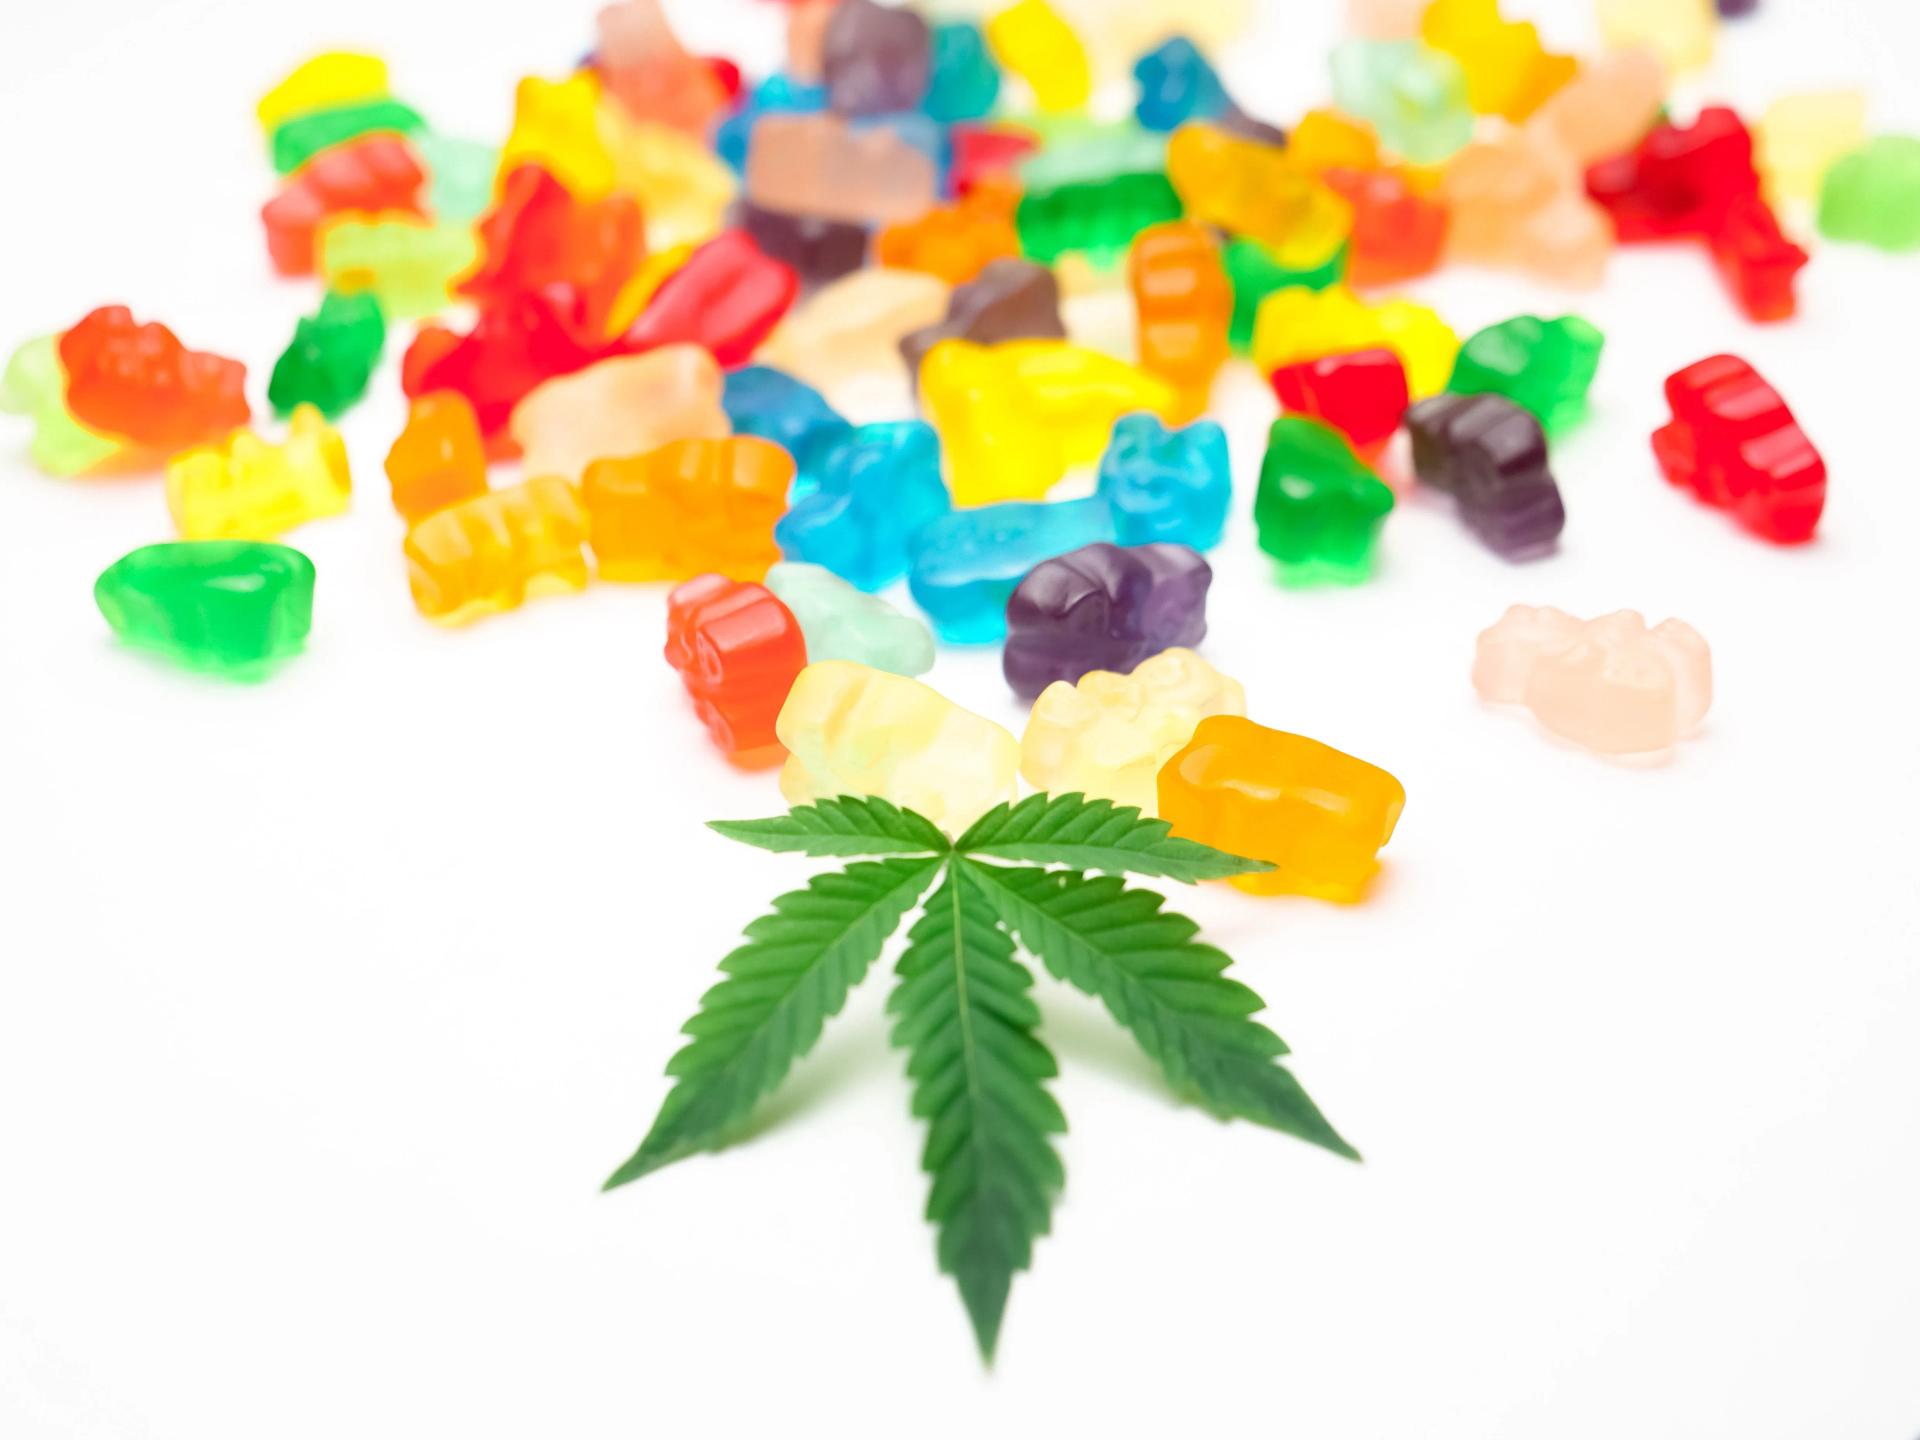 Colorful Gummies next to a Weed Leaf